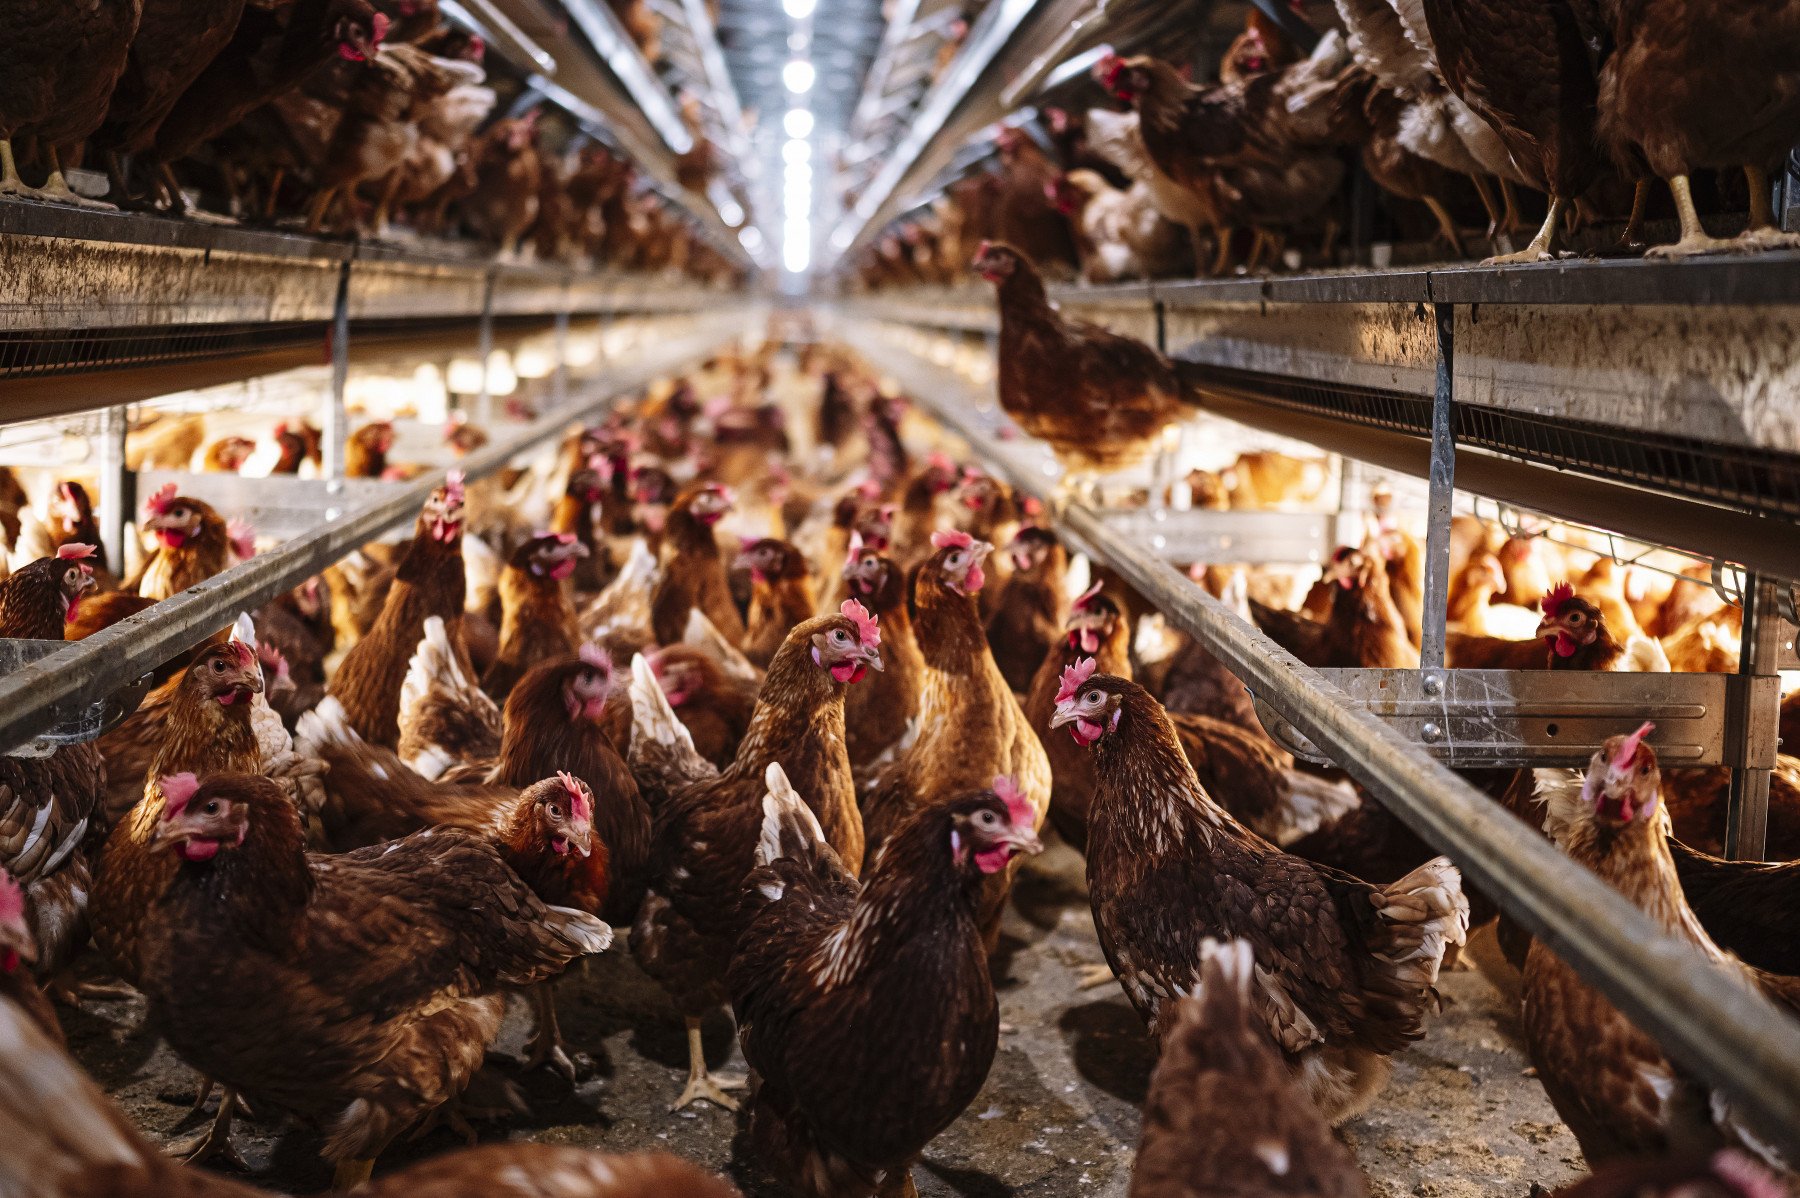 What's the Difference Between “Cage-Free” and “Free Range” Eggs?